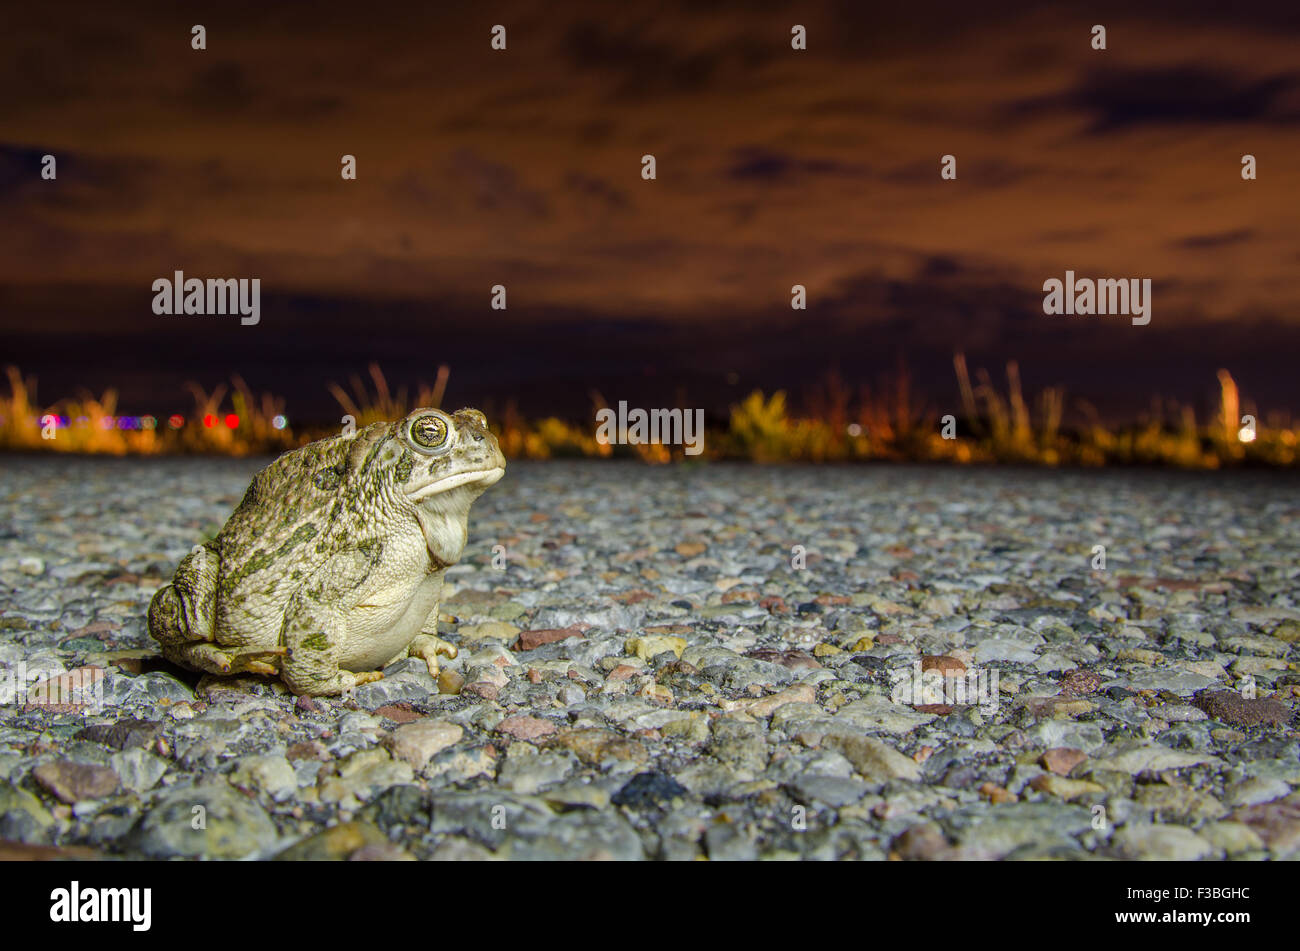 Great Plains Toad, (Anaxyrus cognatus), west of Albuquerque, New Mexico, USA. Stock Photo